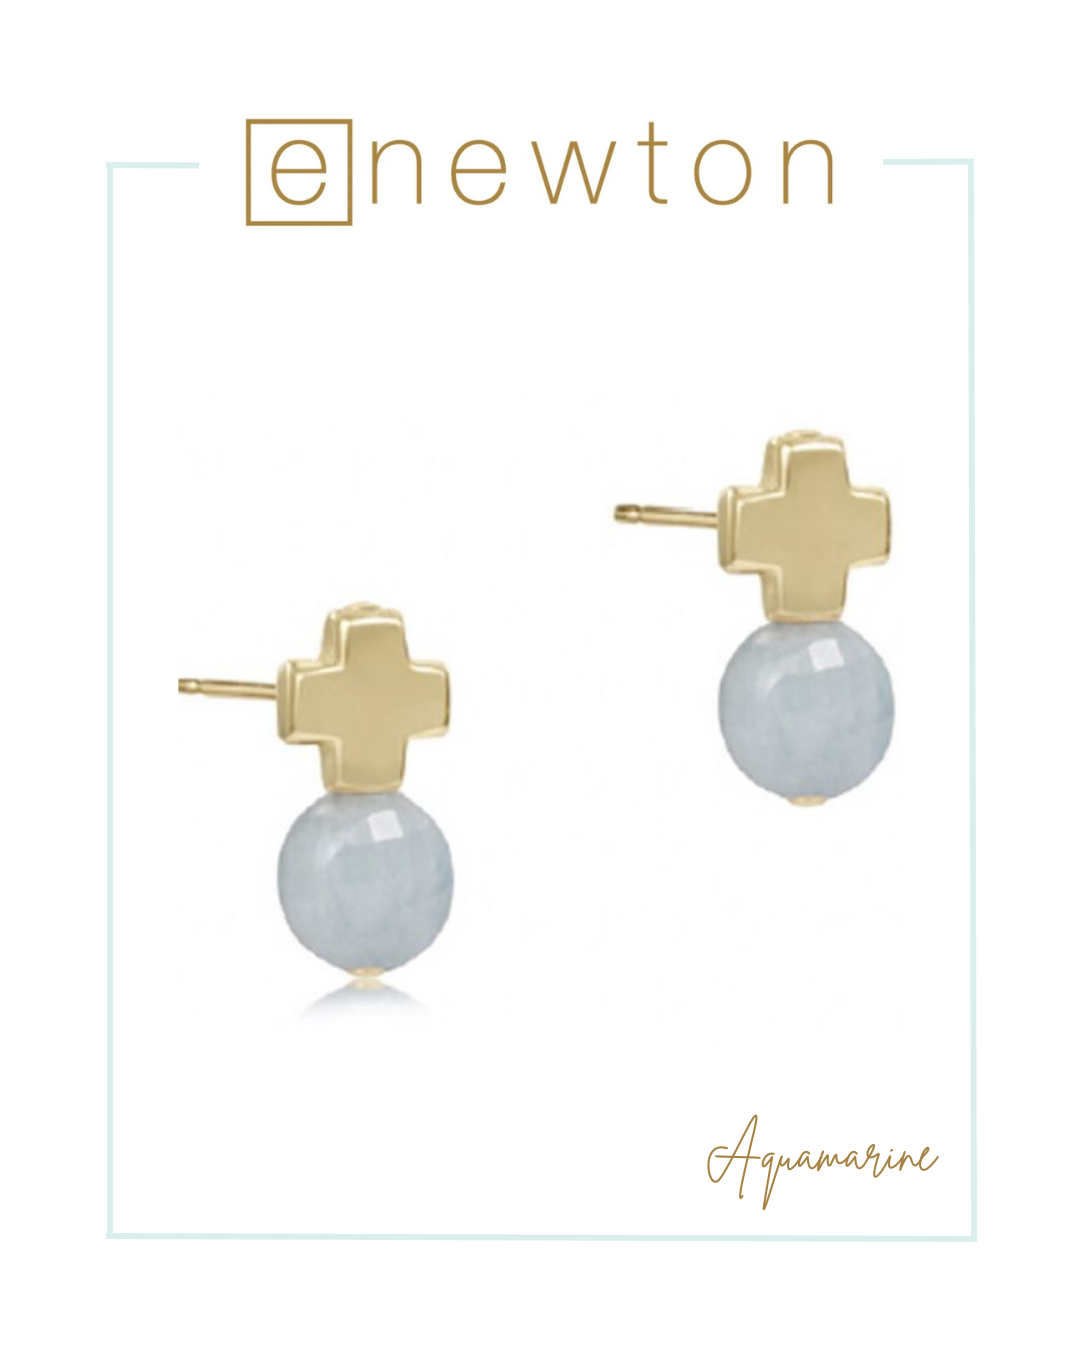 E Newton Signature Cross Gold Stud - Spring/Summer Gemstones-Earrings-ENEWTON-The Village Shoppe, Women’s Fashion Boutique, Shop Online and In Store - Located in Muscle Shoals, AL.